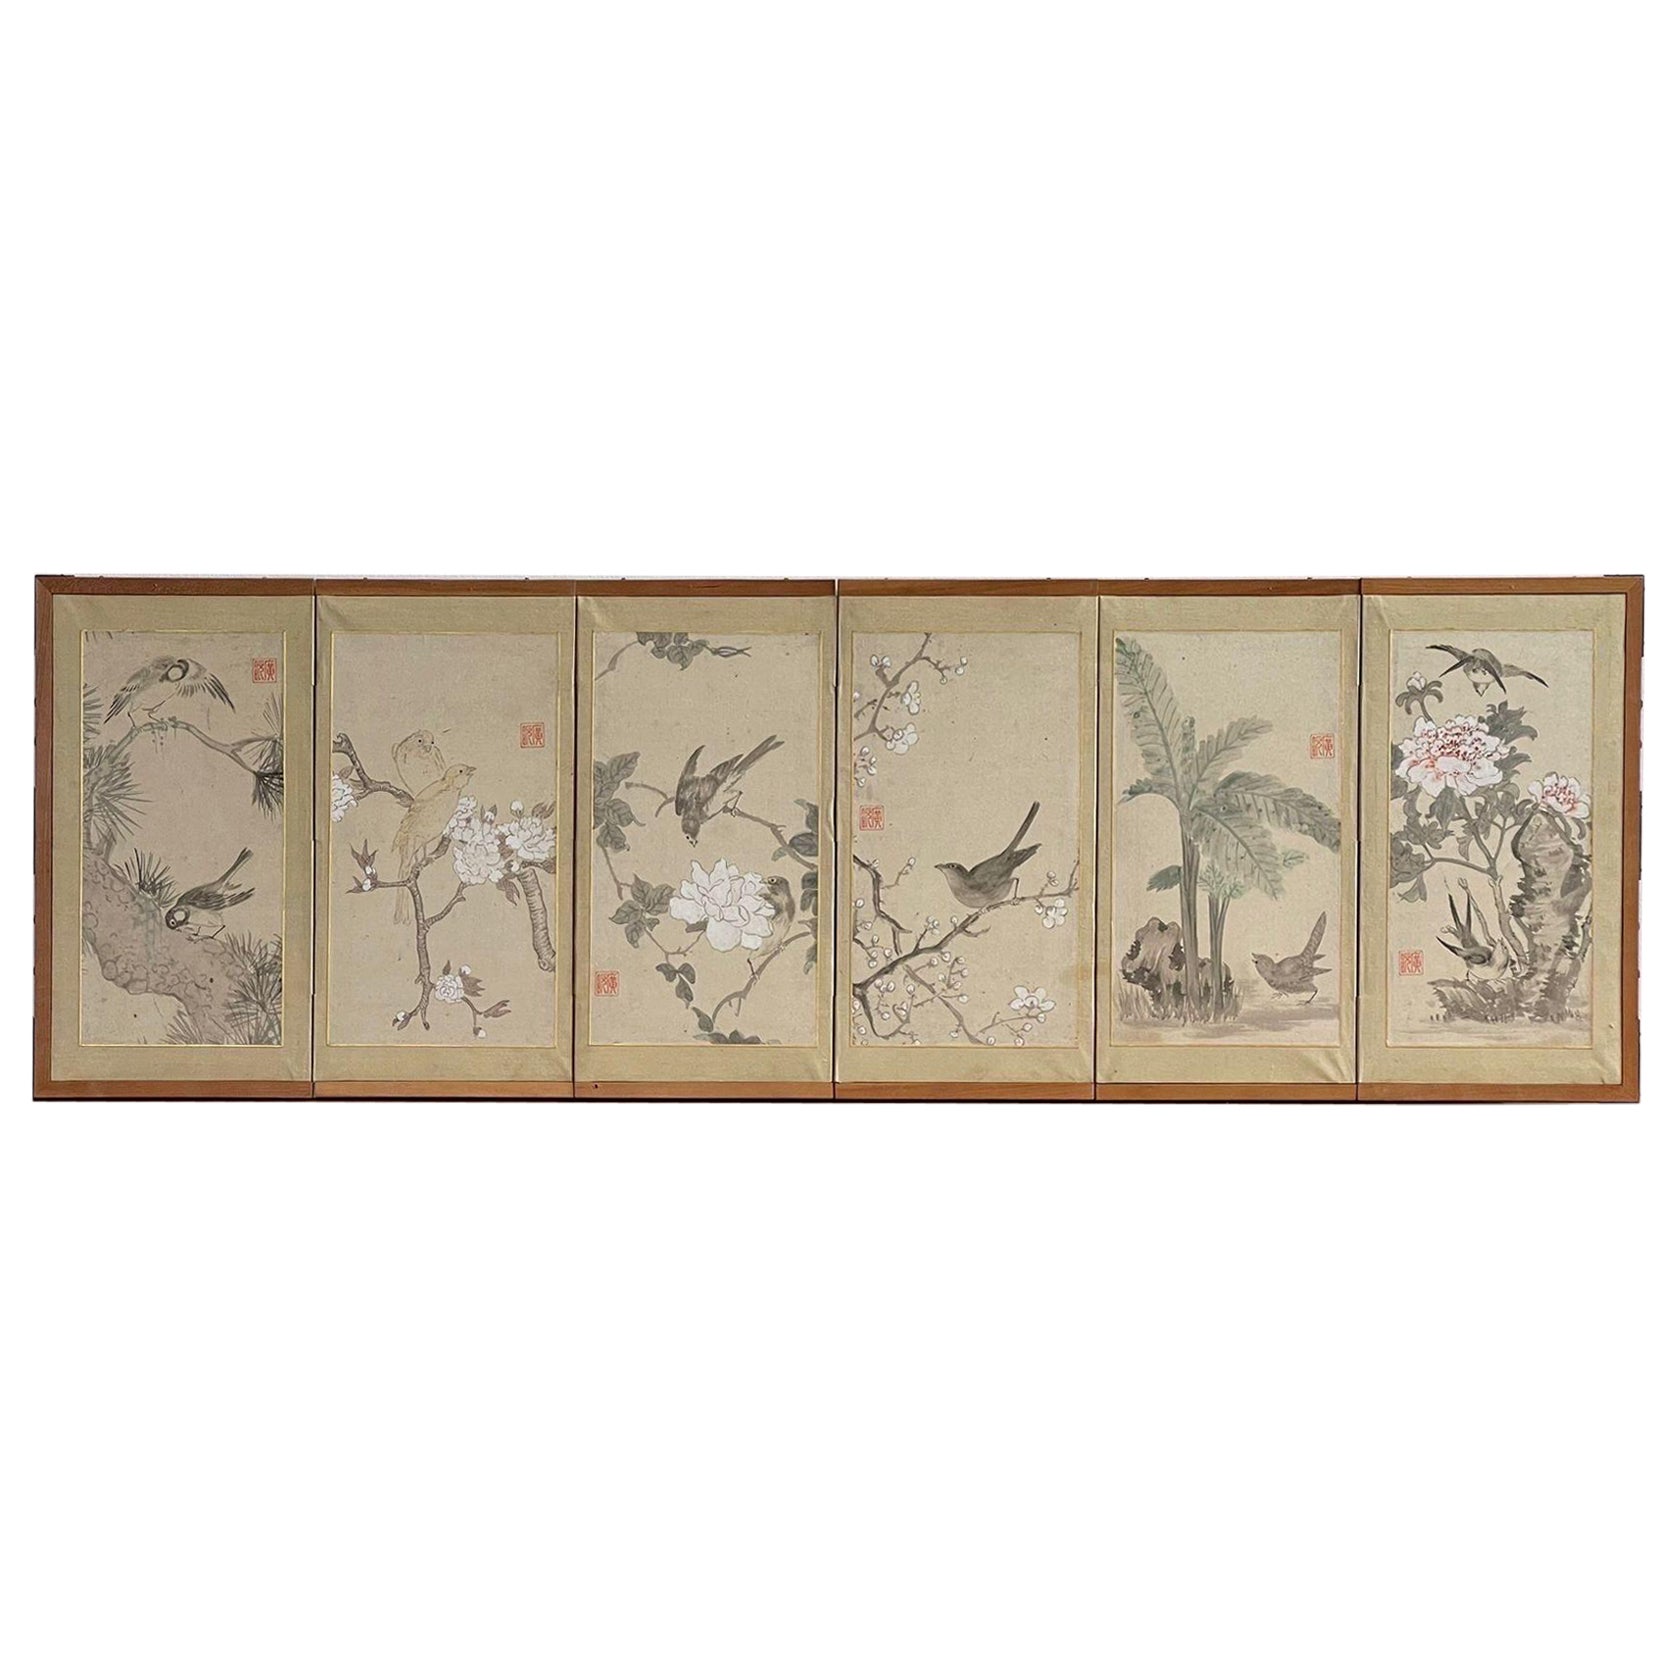 Vintage Framed and Signed Japanese 6 Panel Painting Within Wooden Frame. For Sale